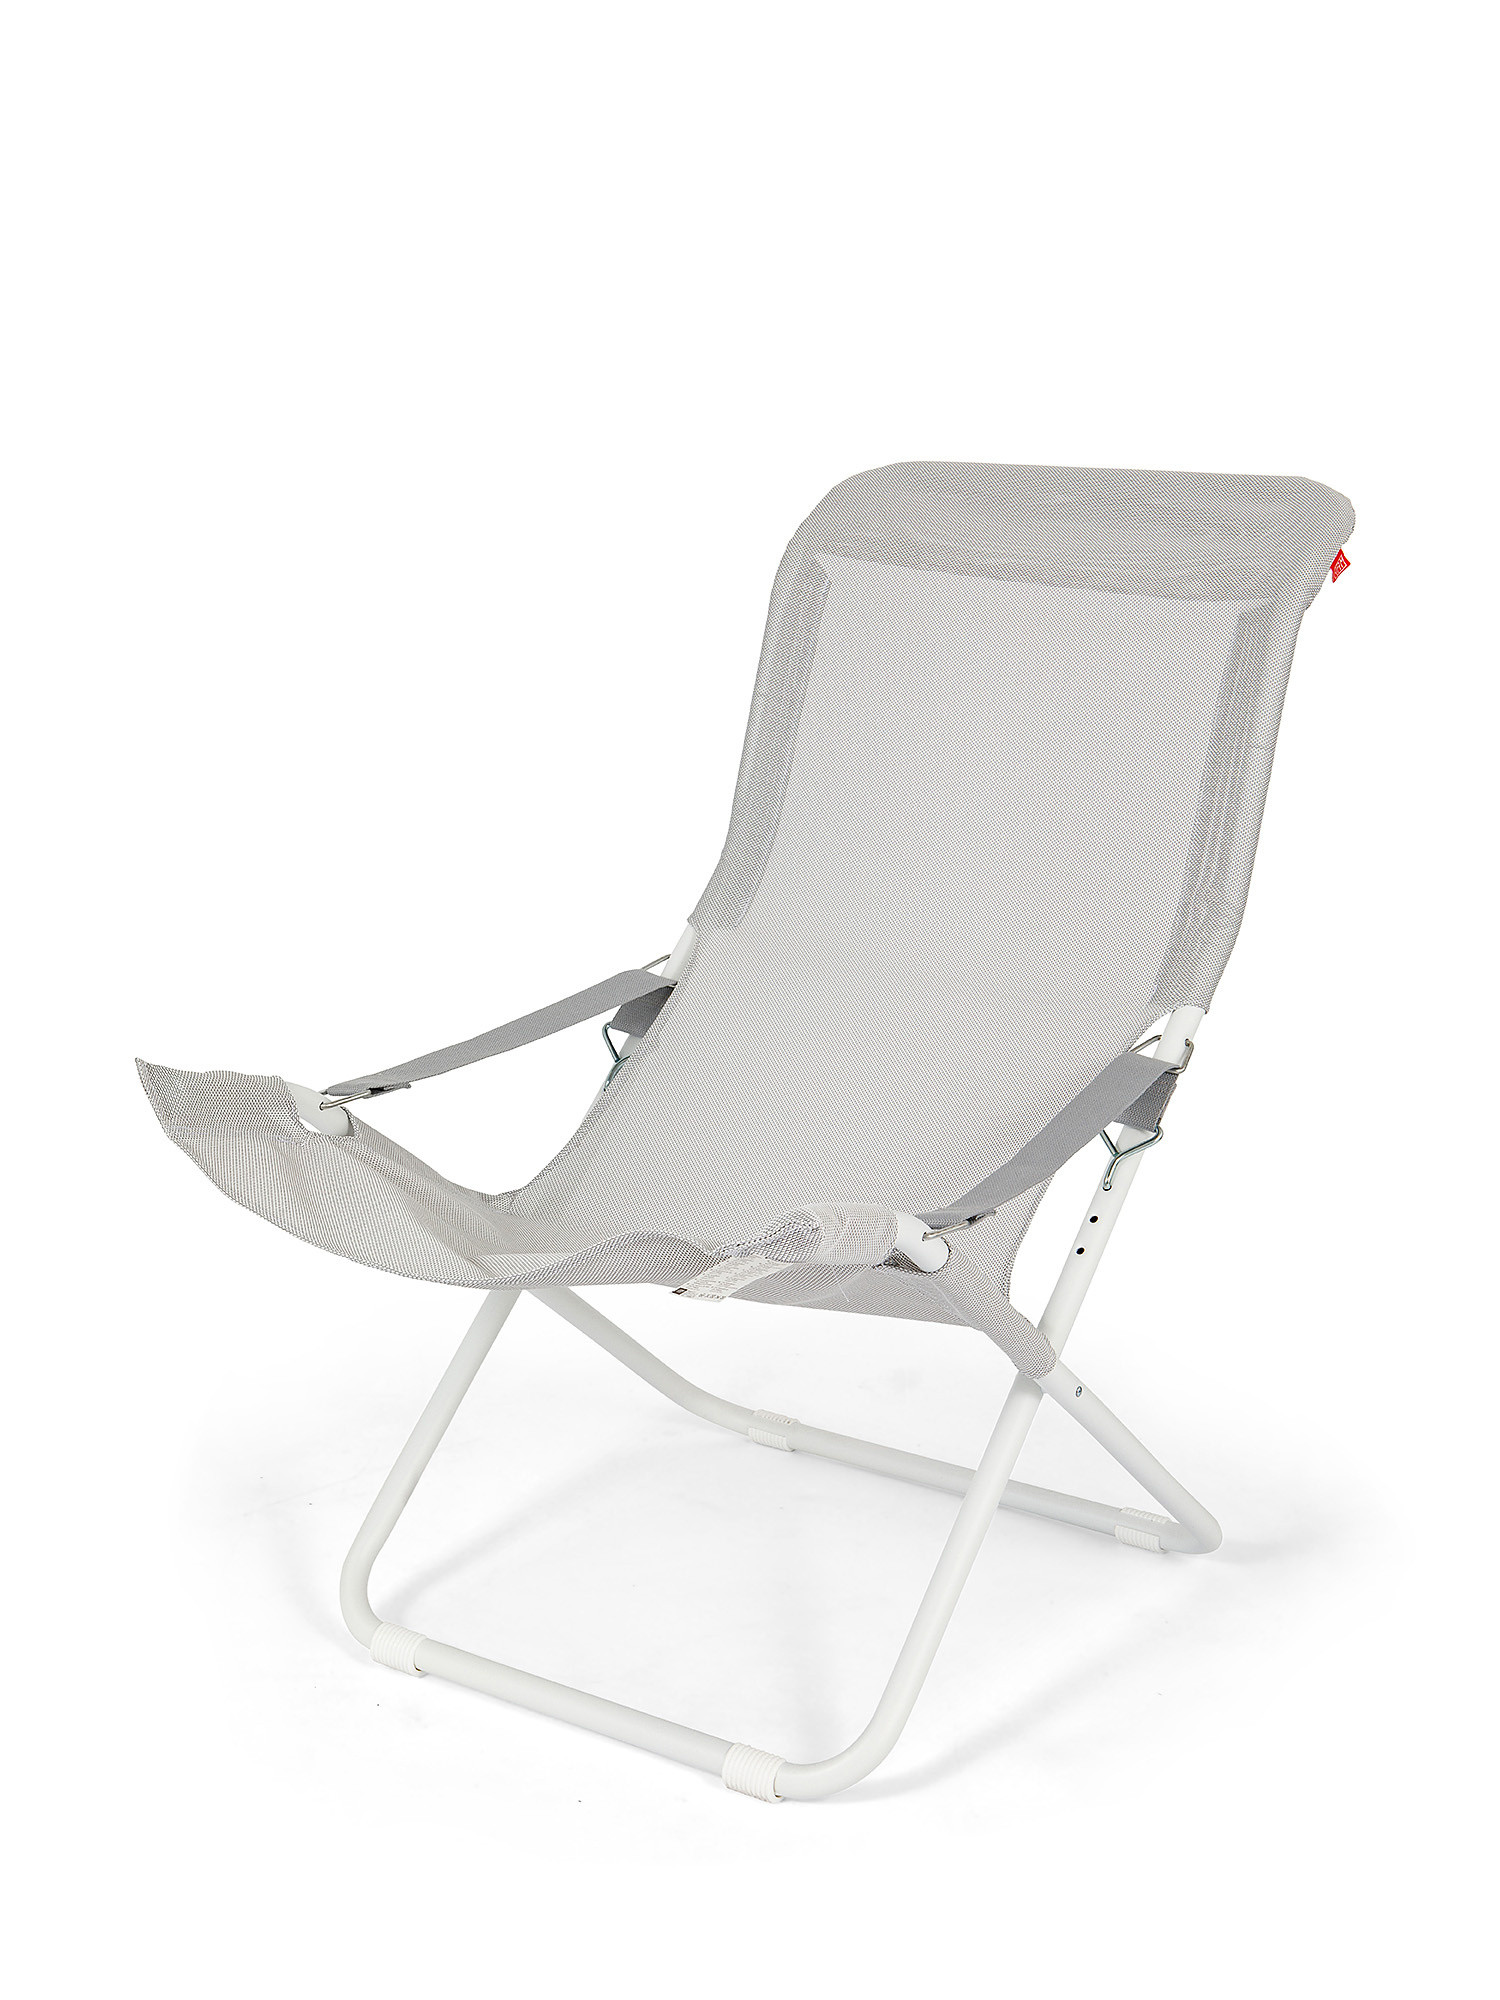 Fiam - Fiesta anatomic adjustable outdoor deck chair, White, large image number 0